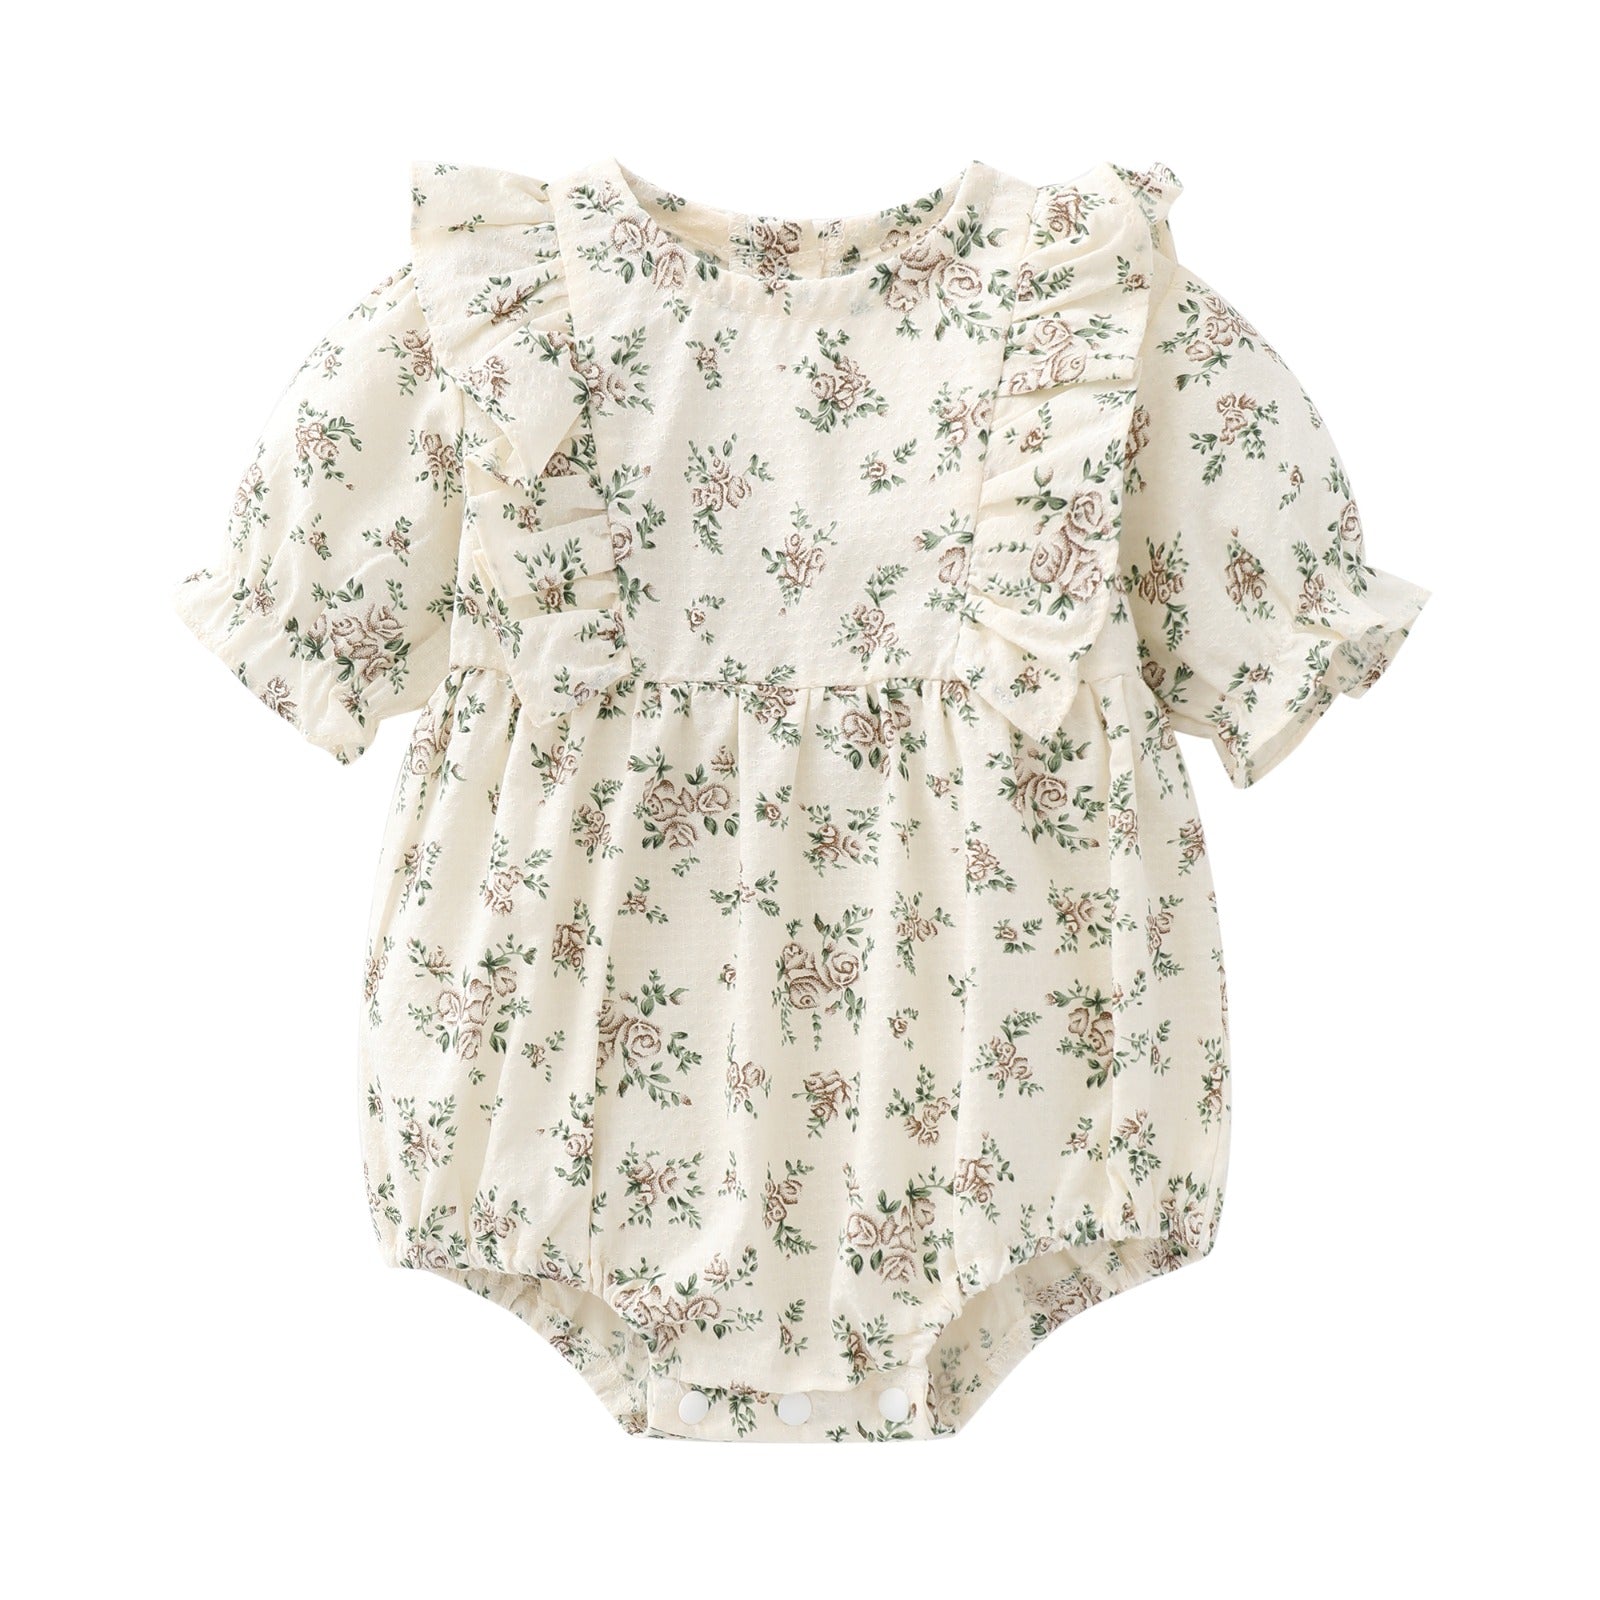 BLOSSOM Floral Romper with Headband